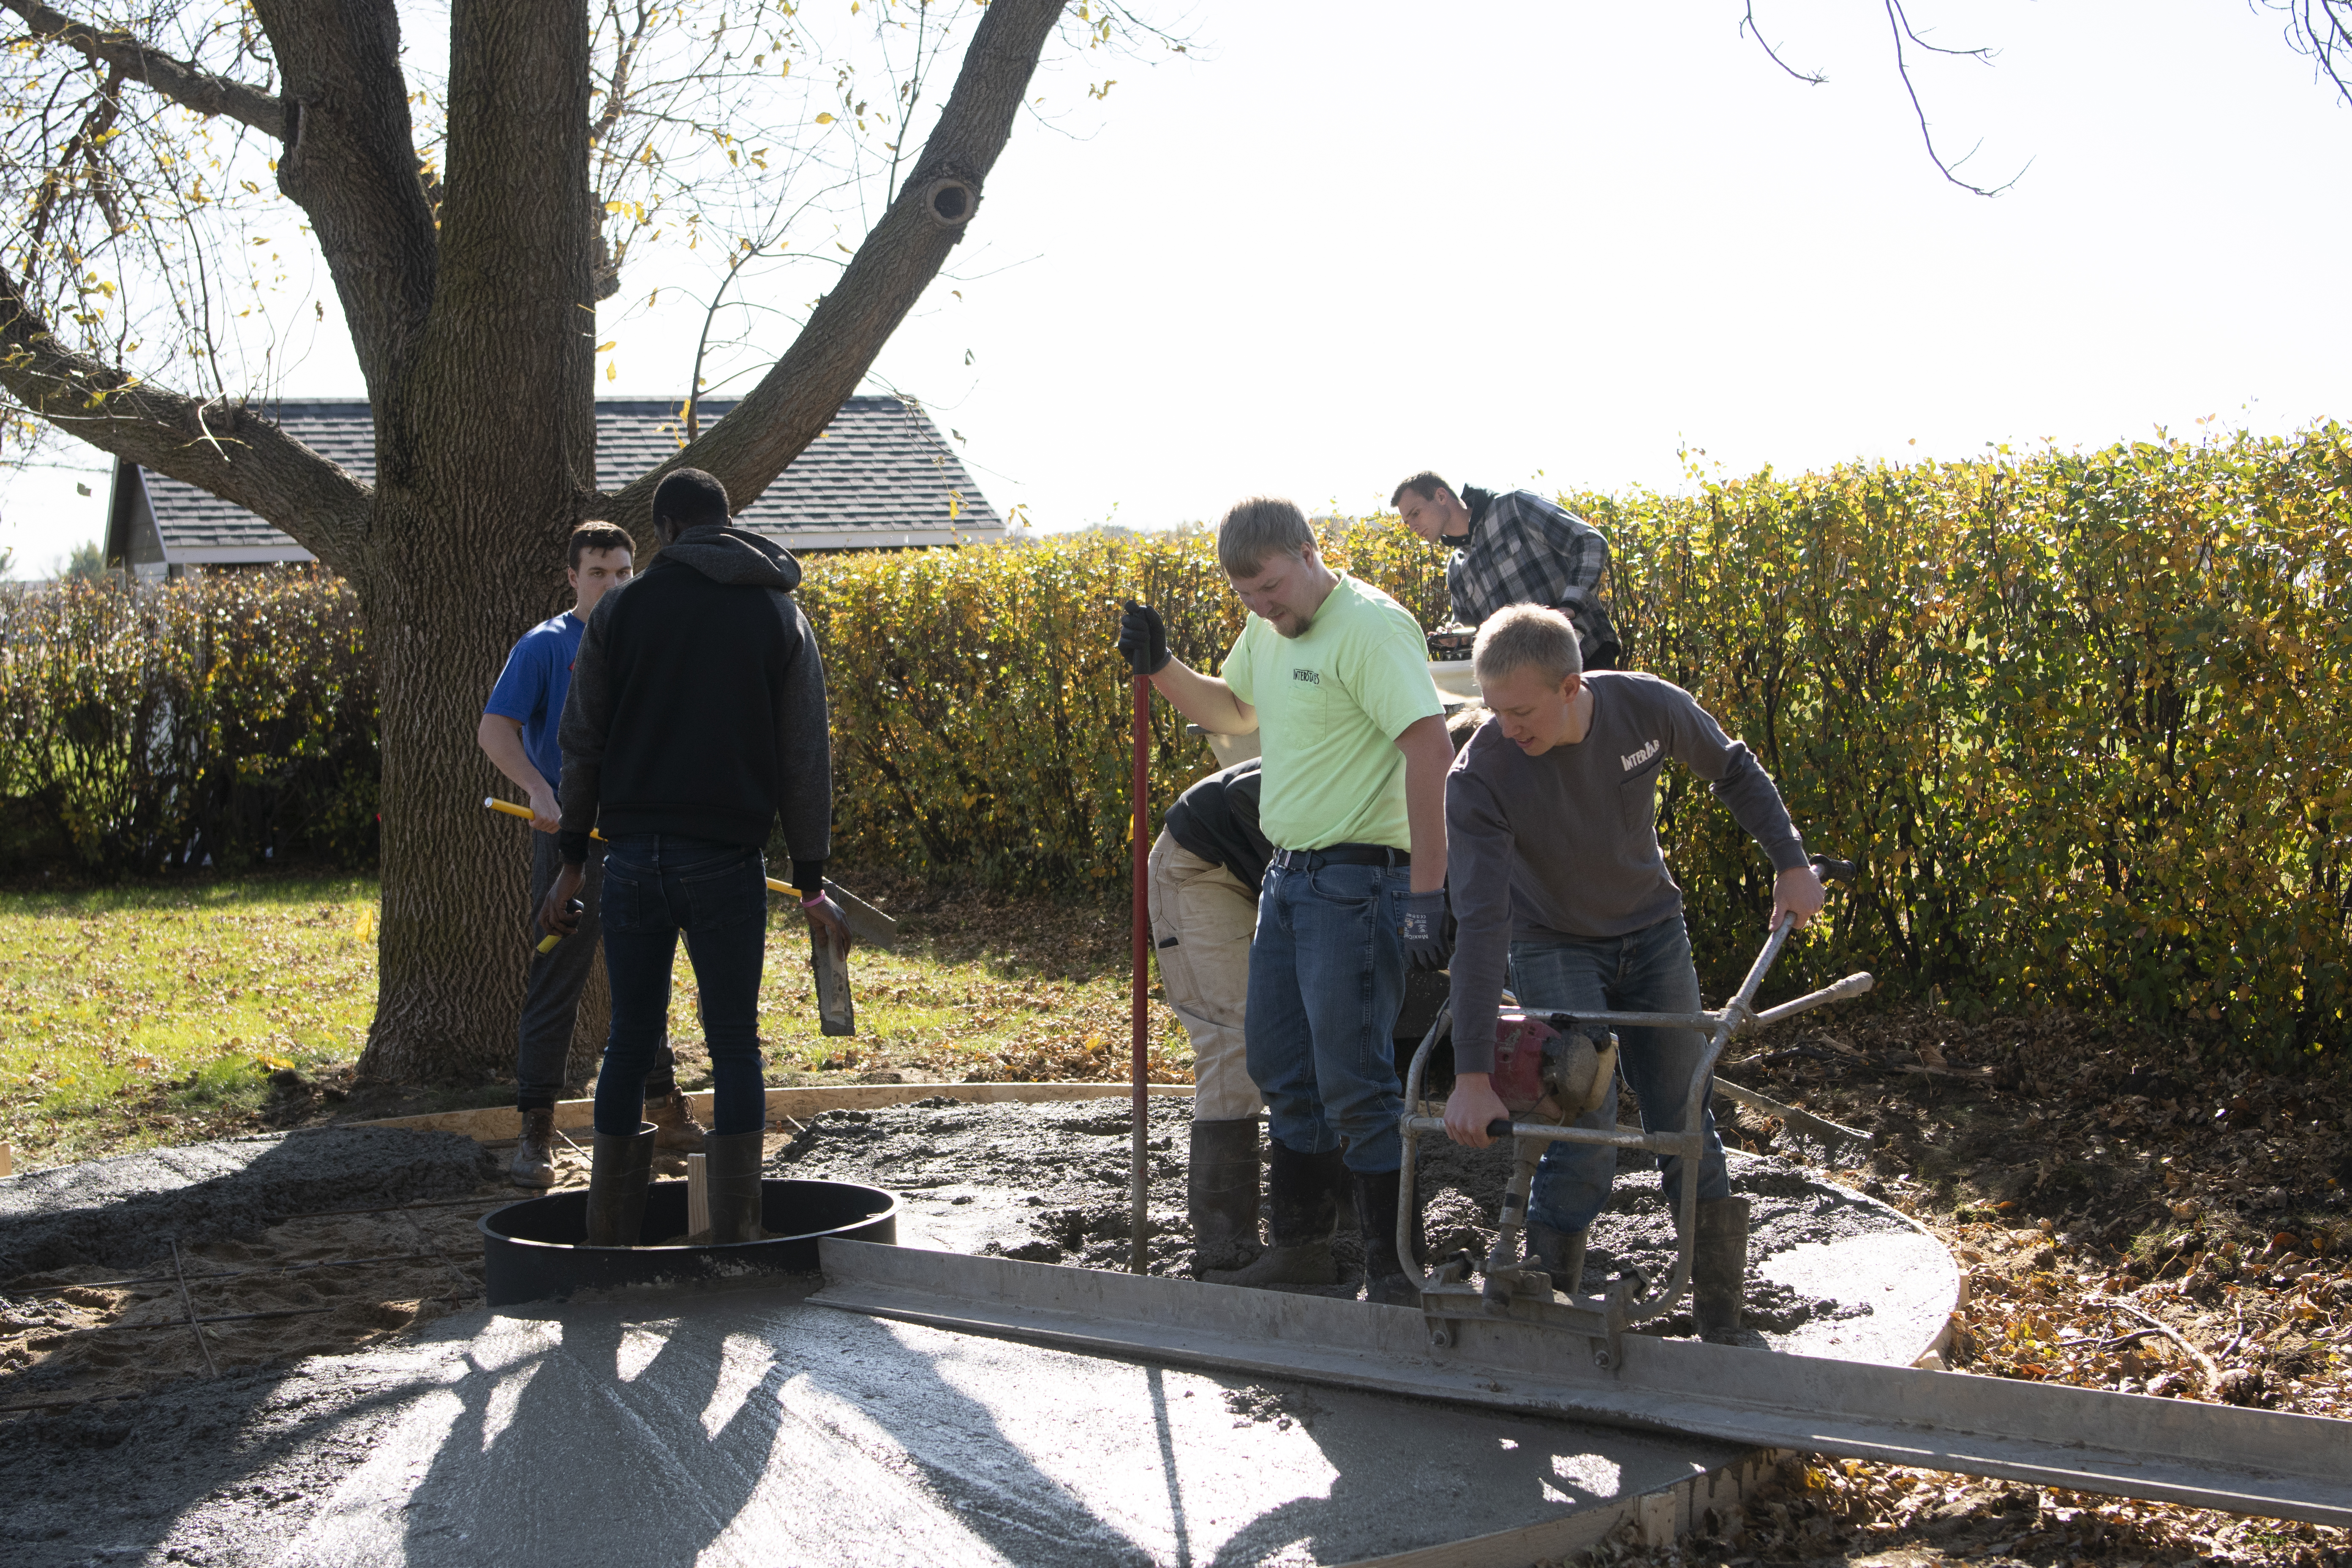 Students work pouring concrete for a fire pit